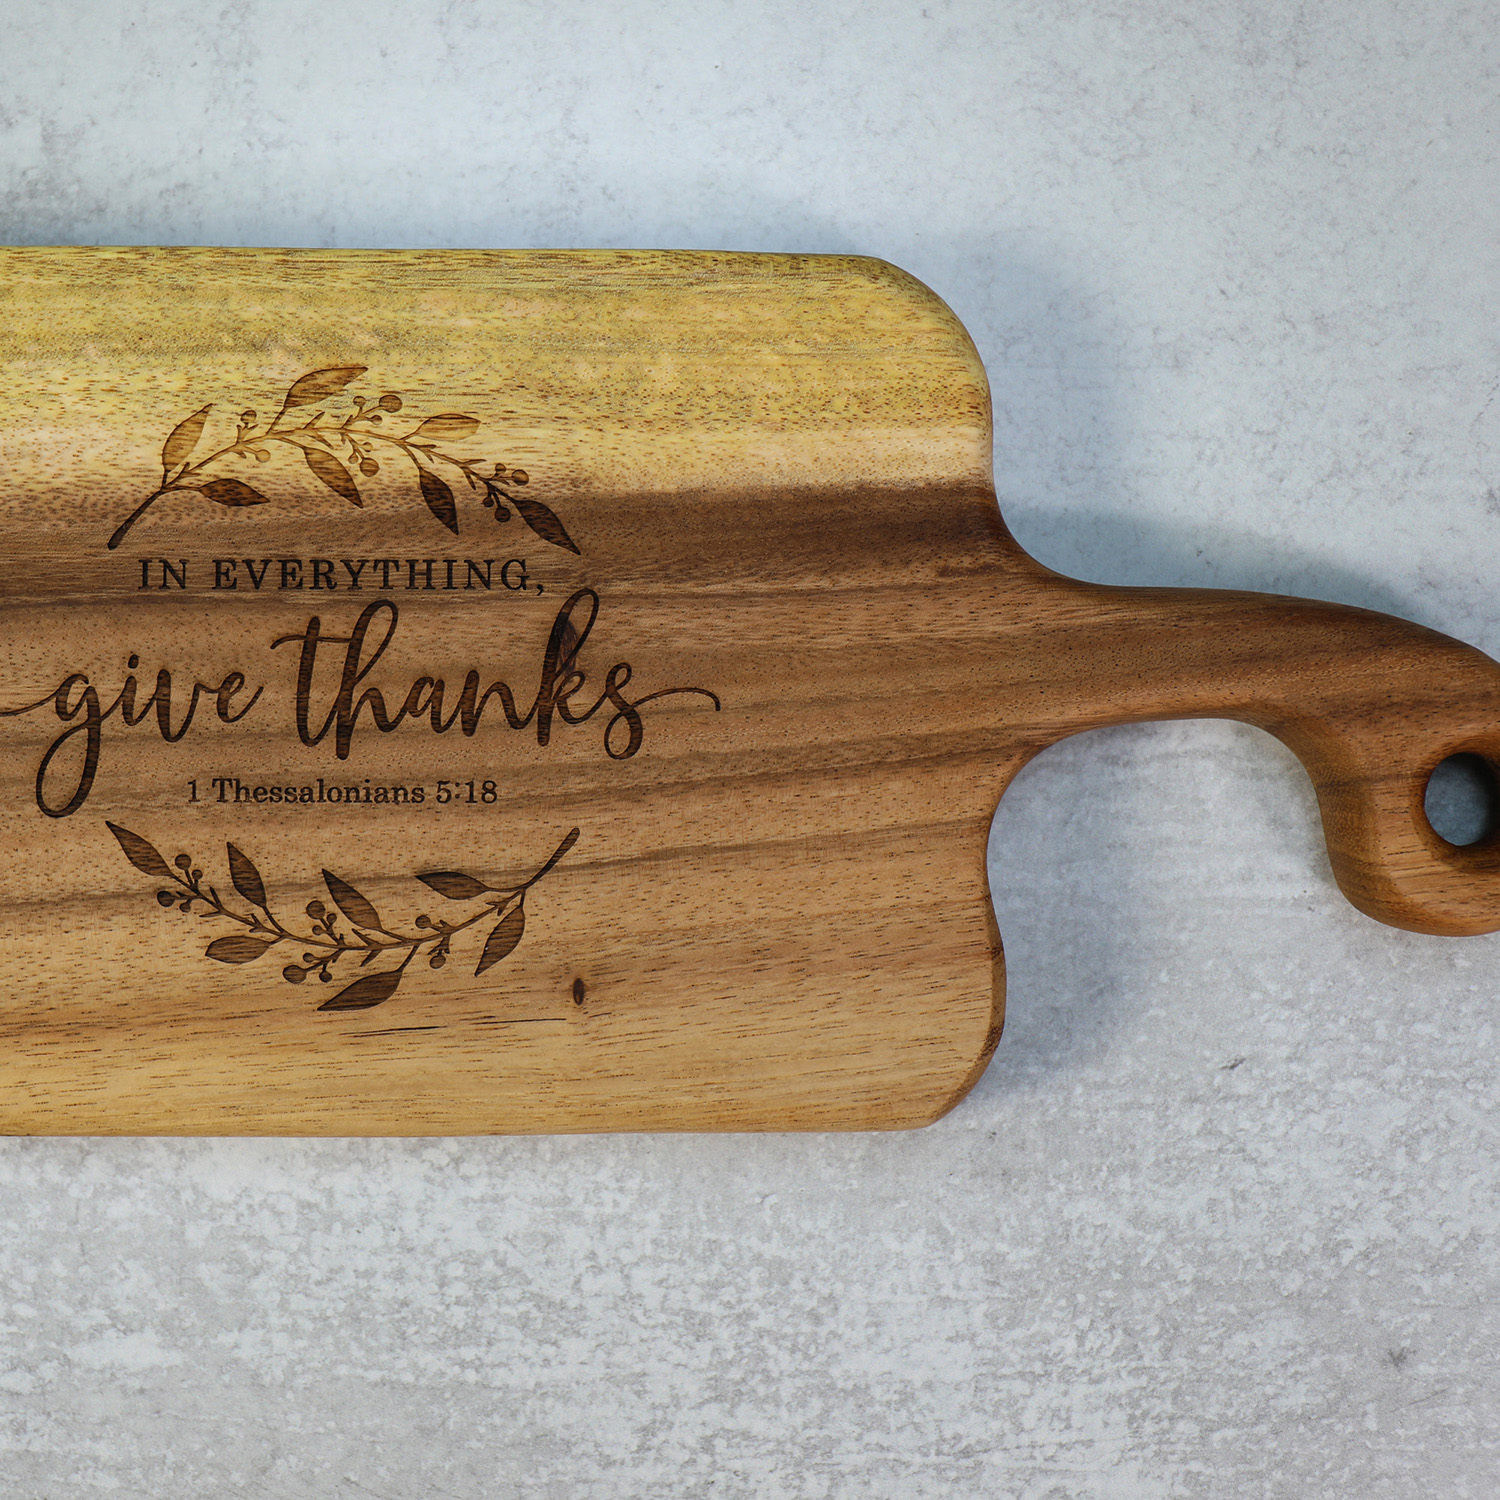 https://portalofhope.com/wp-content/uploads/2022/06/Tuckahoe-Hardwoods-GIVE-THANKS-Small-Walnut-Charcuterie-Cutting-Board-with-Handle-Main.jpg